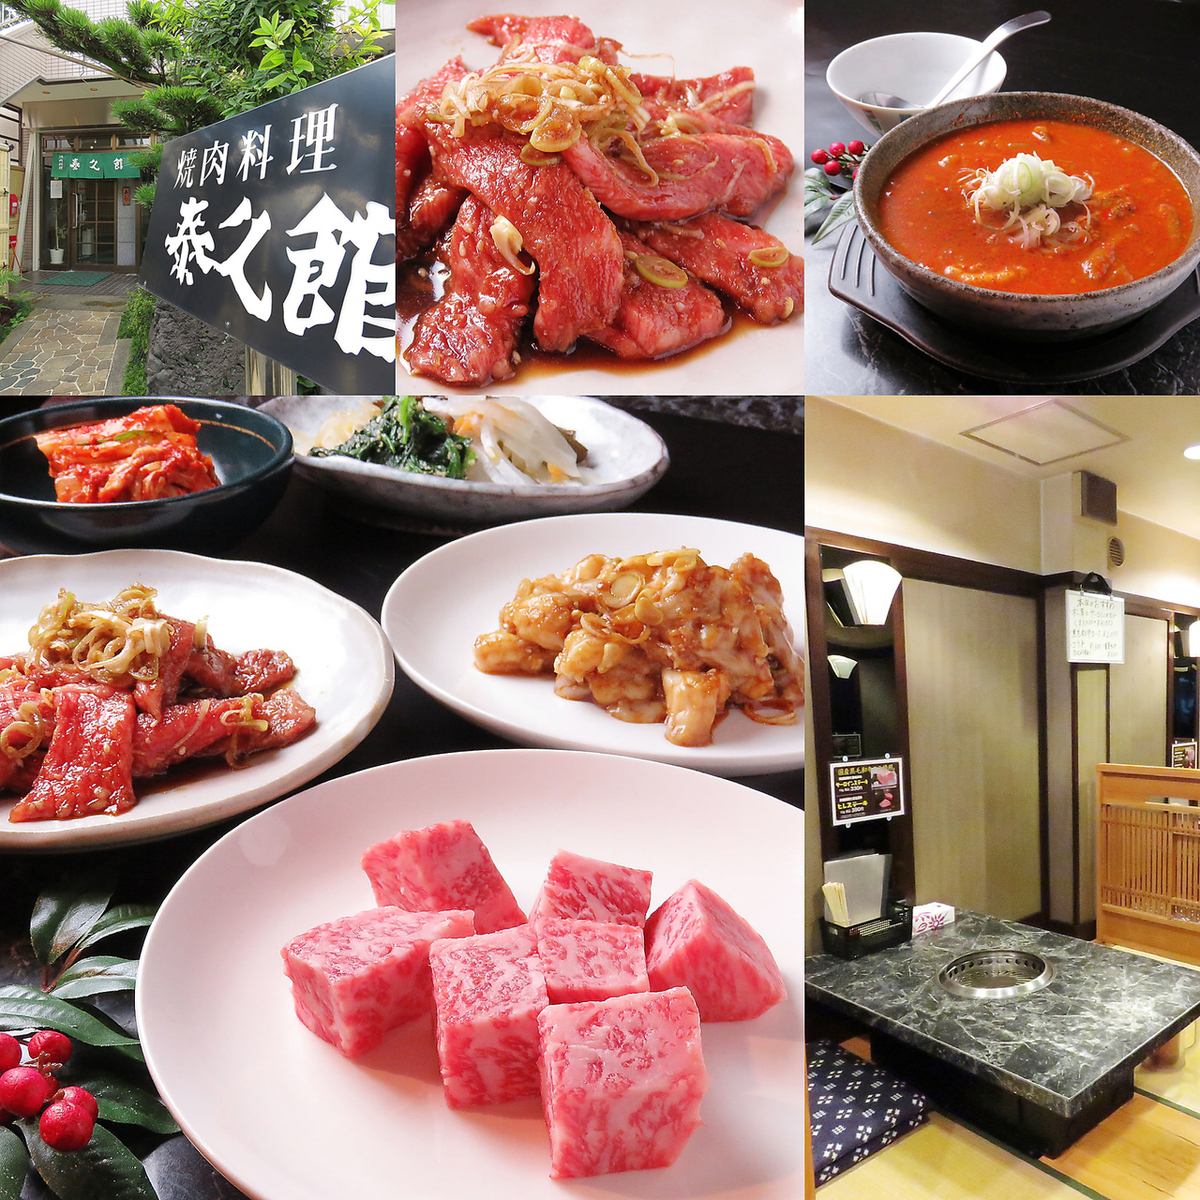 Recommended for dates ◎ The tatami room has a partition and a calm atmosphere ◎